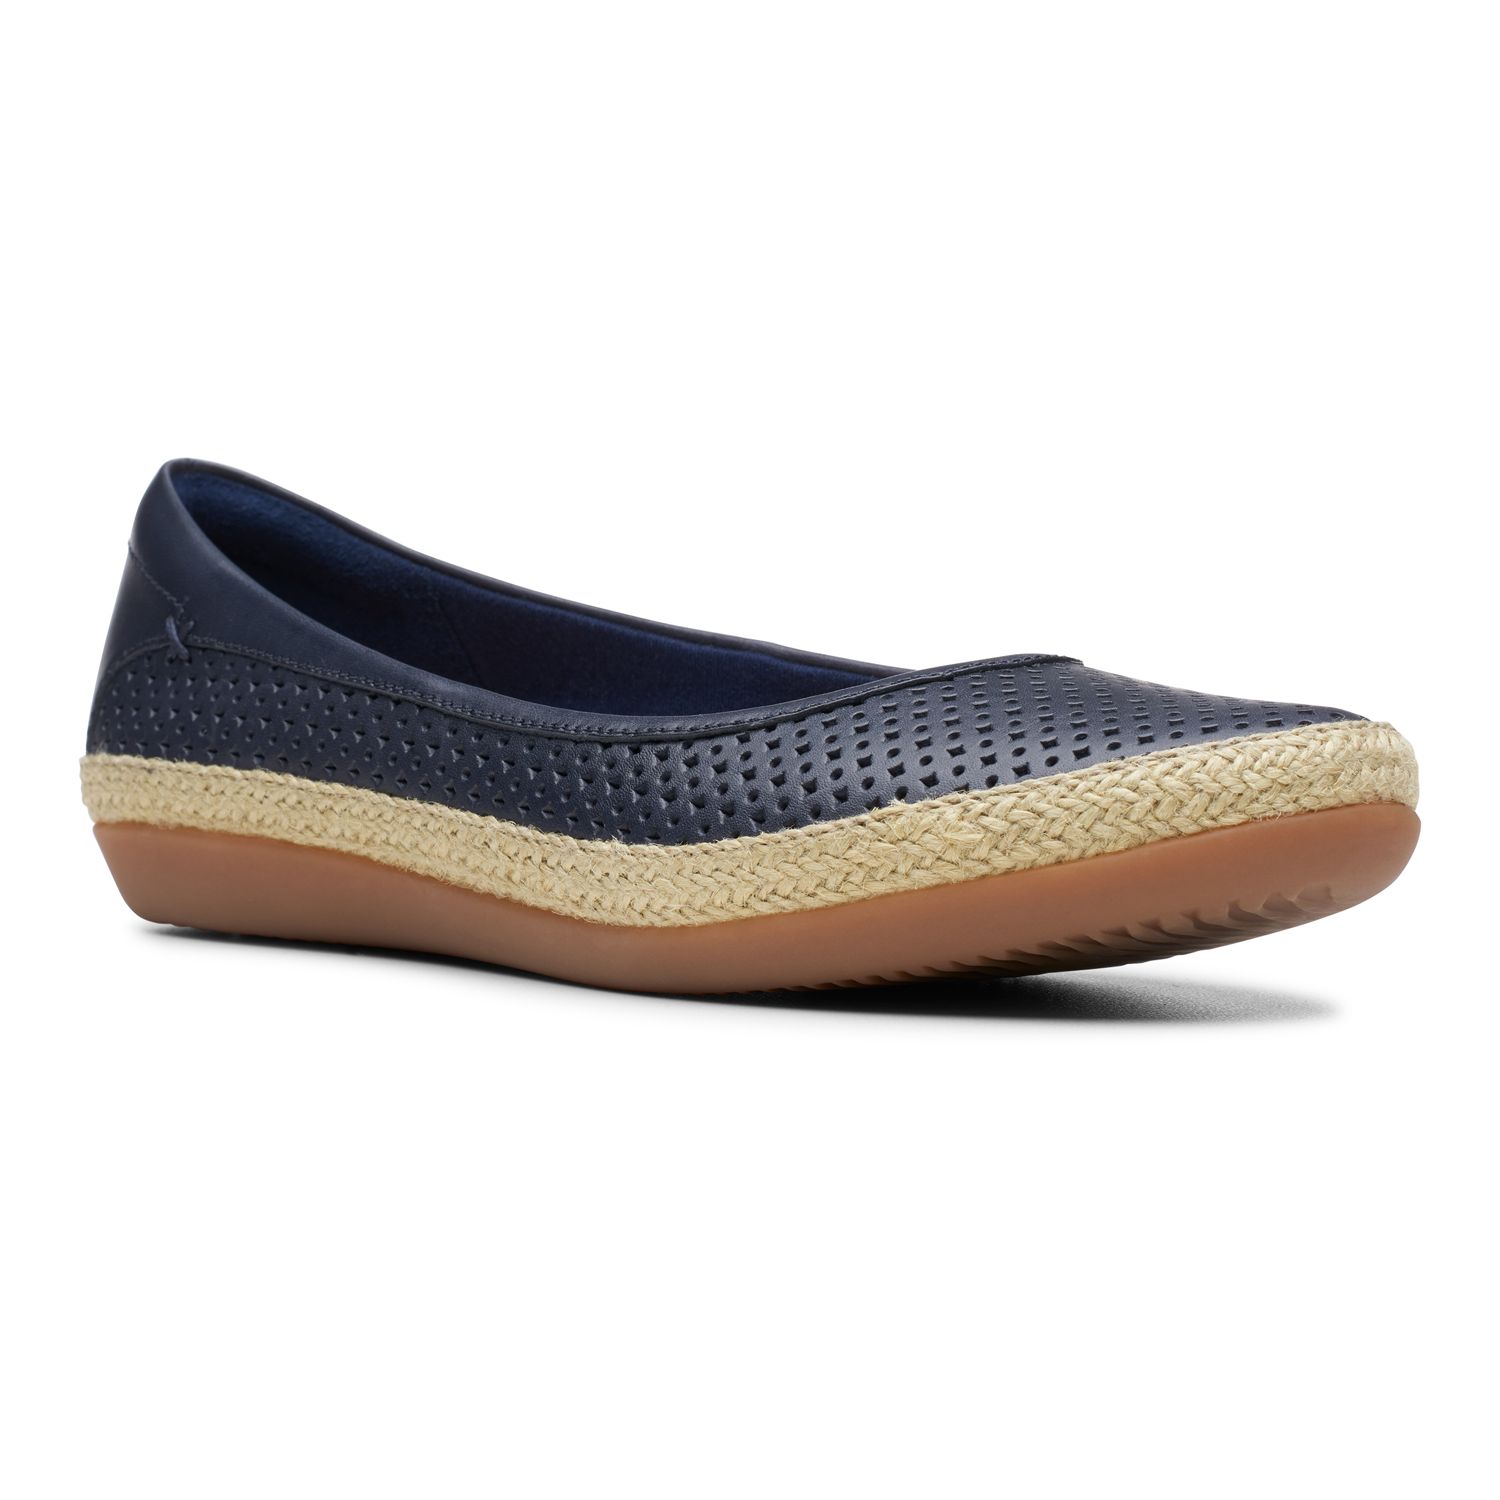 clarks collection women's danelly adira espadrille flats